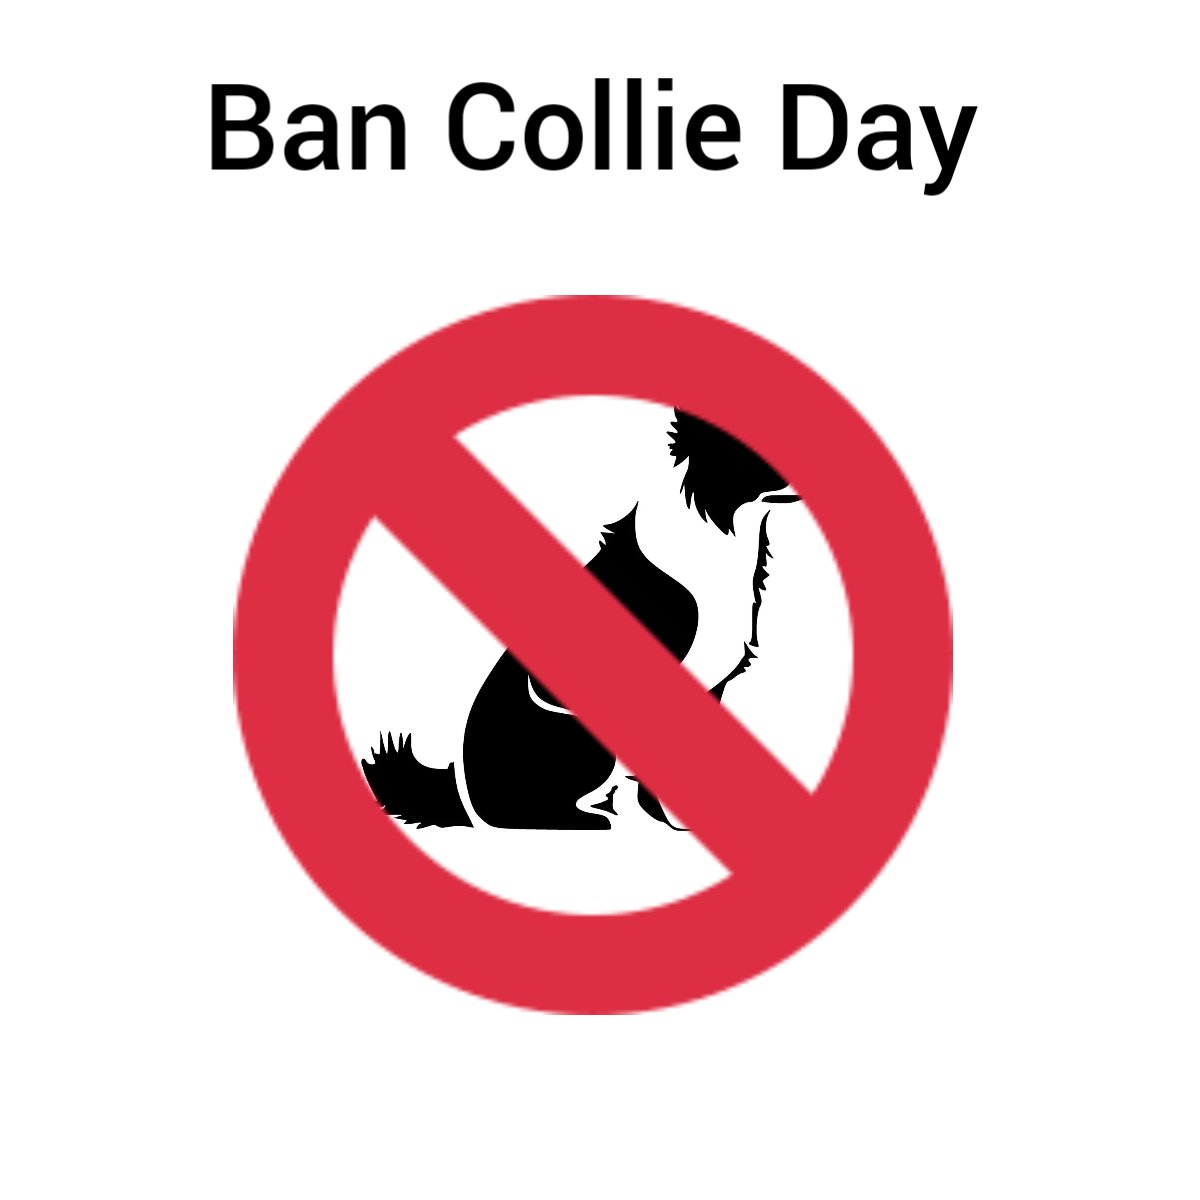 First it was the pit bulls, now they want to ban Collies, they've even dedicated a day to it!